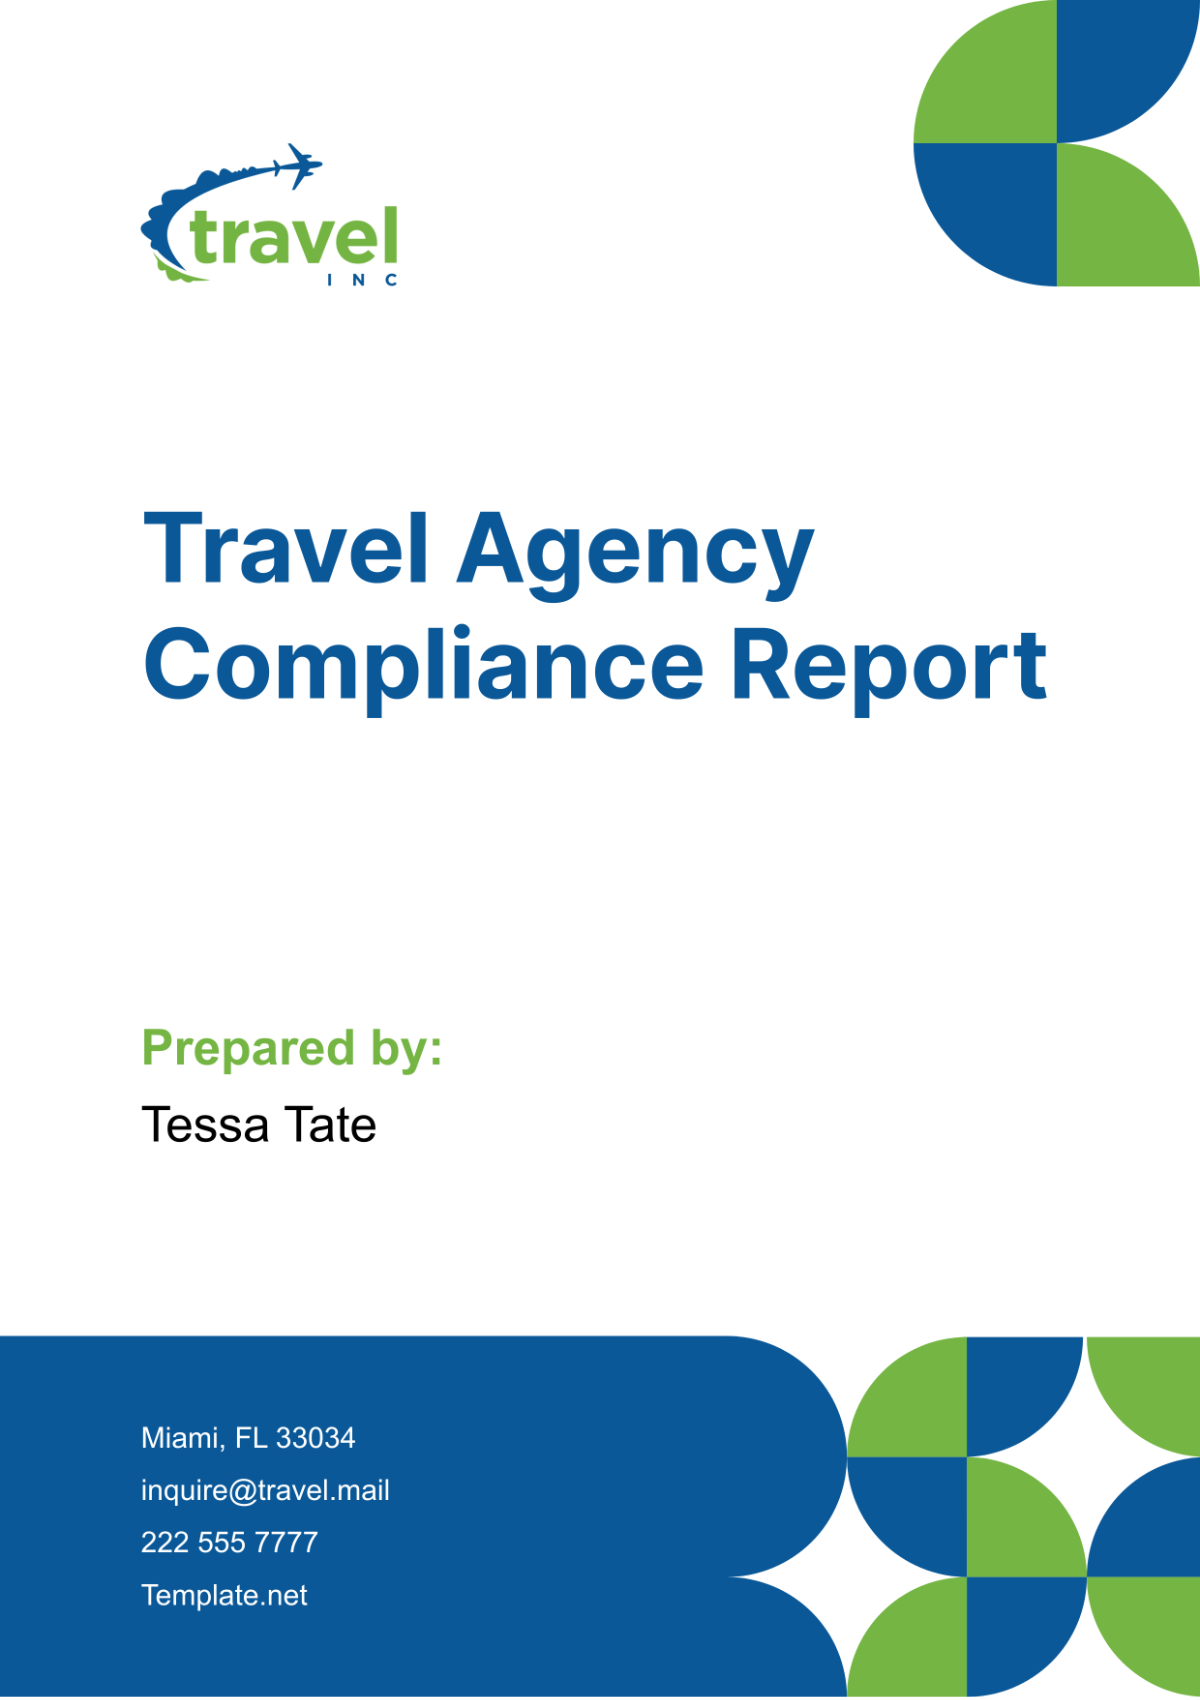 Travel Agency Compliance Report Template